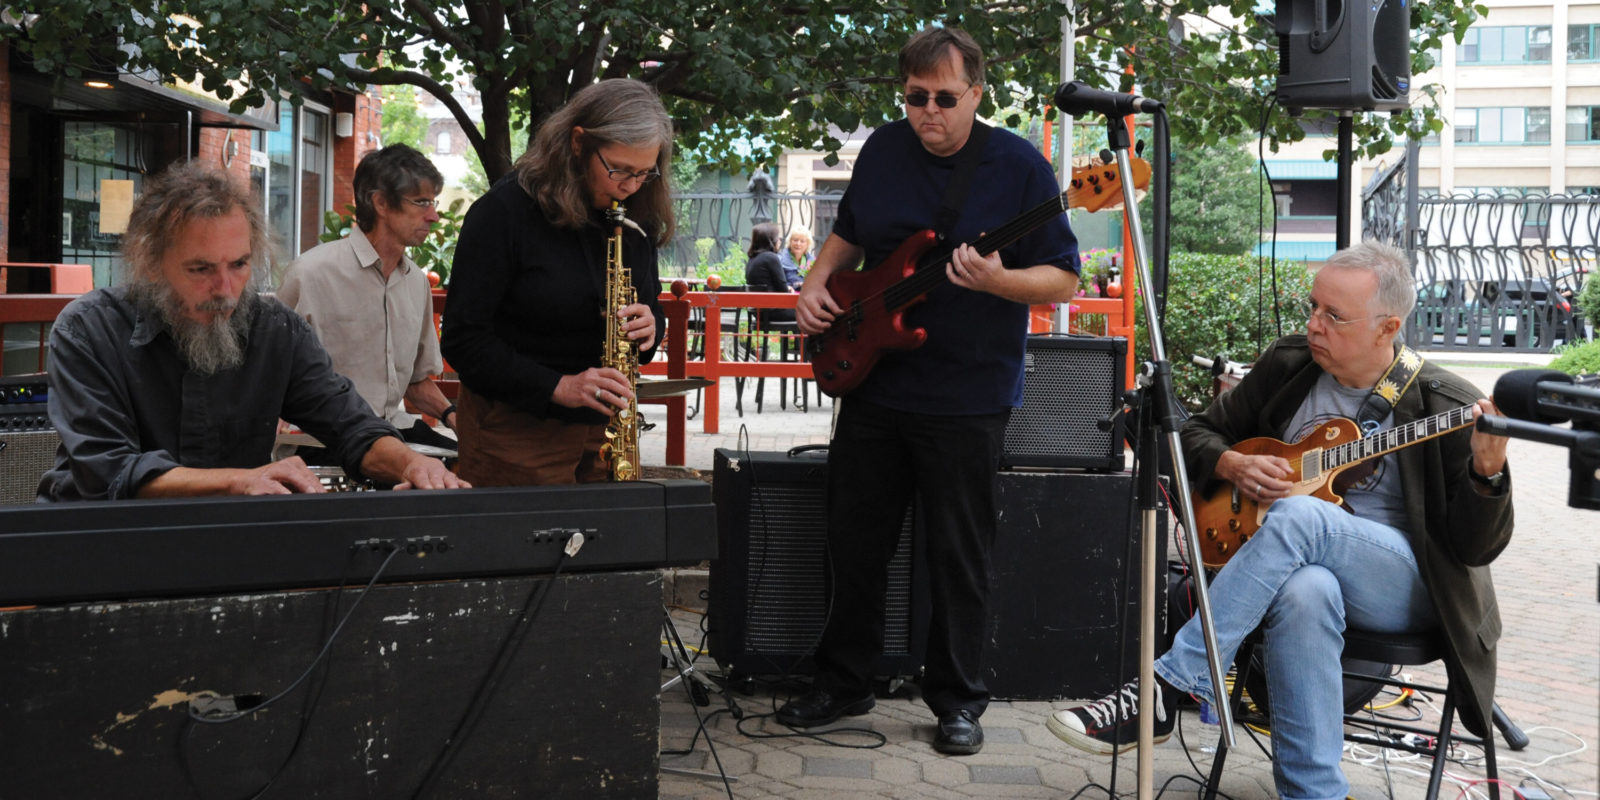 Margaret Explosion with Pete LaBonne performing live at Village Gate courtyard. Photo by Brian Peterson.